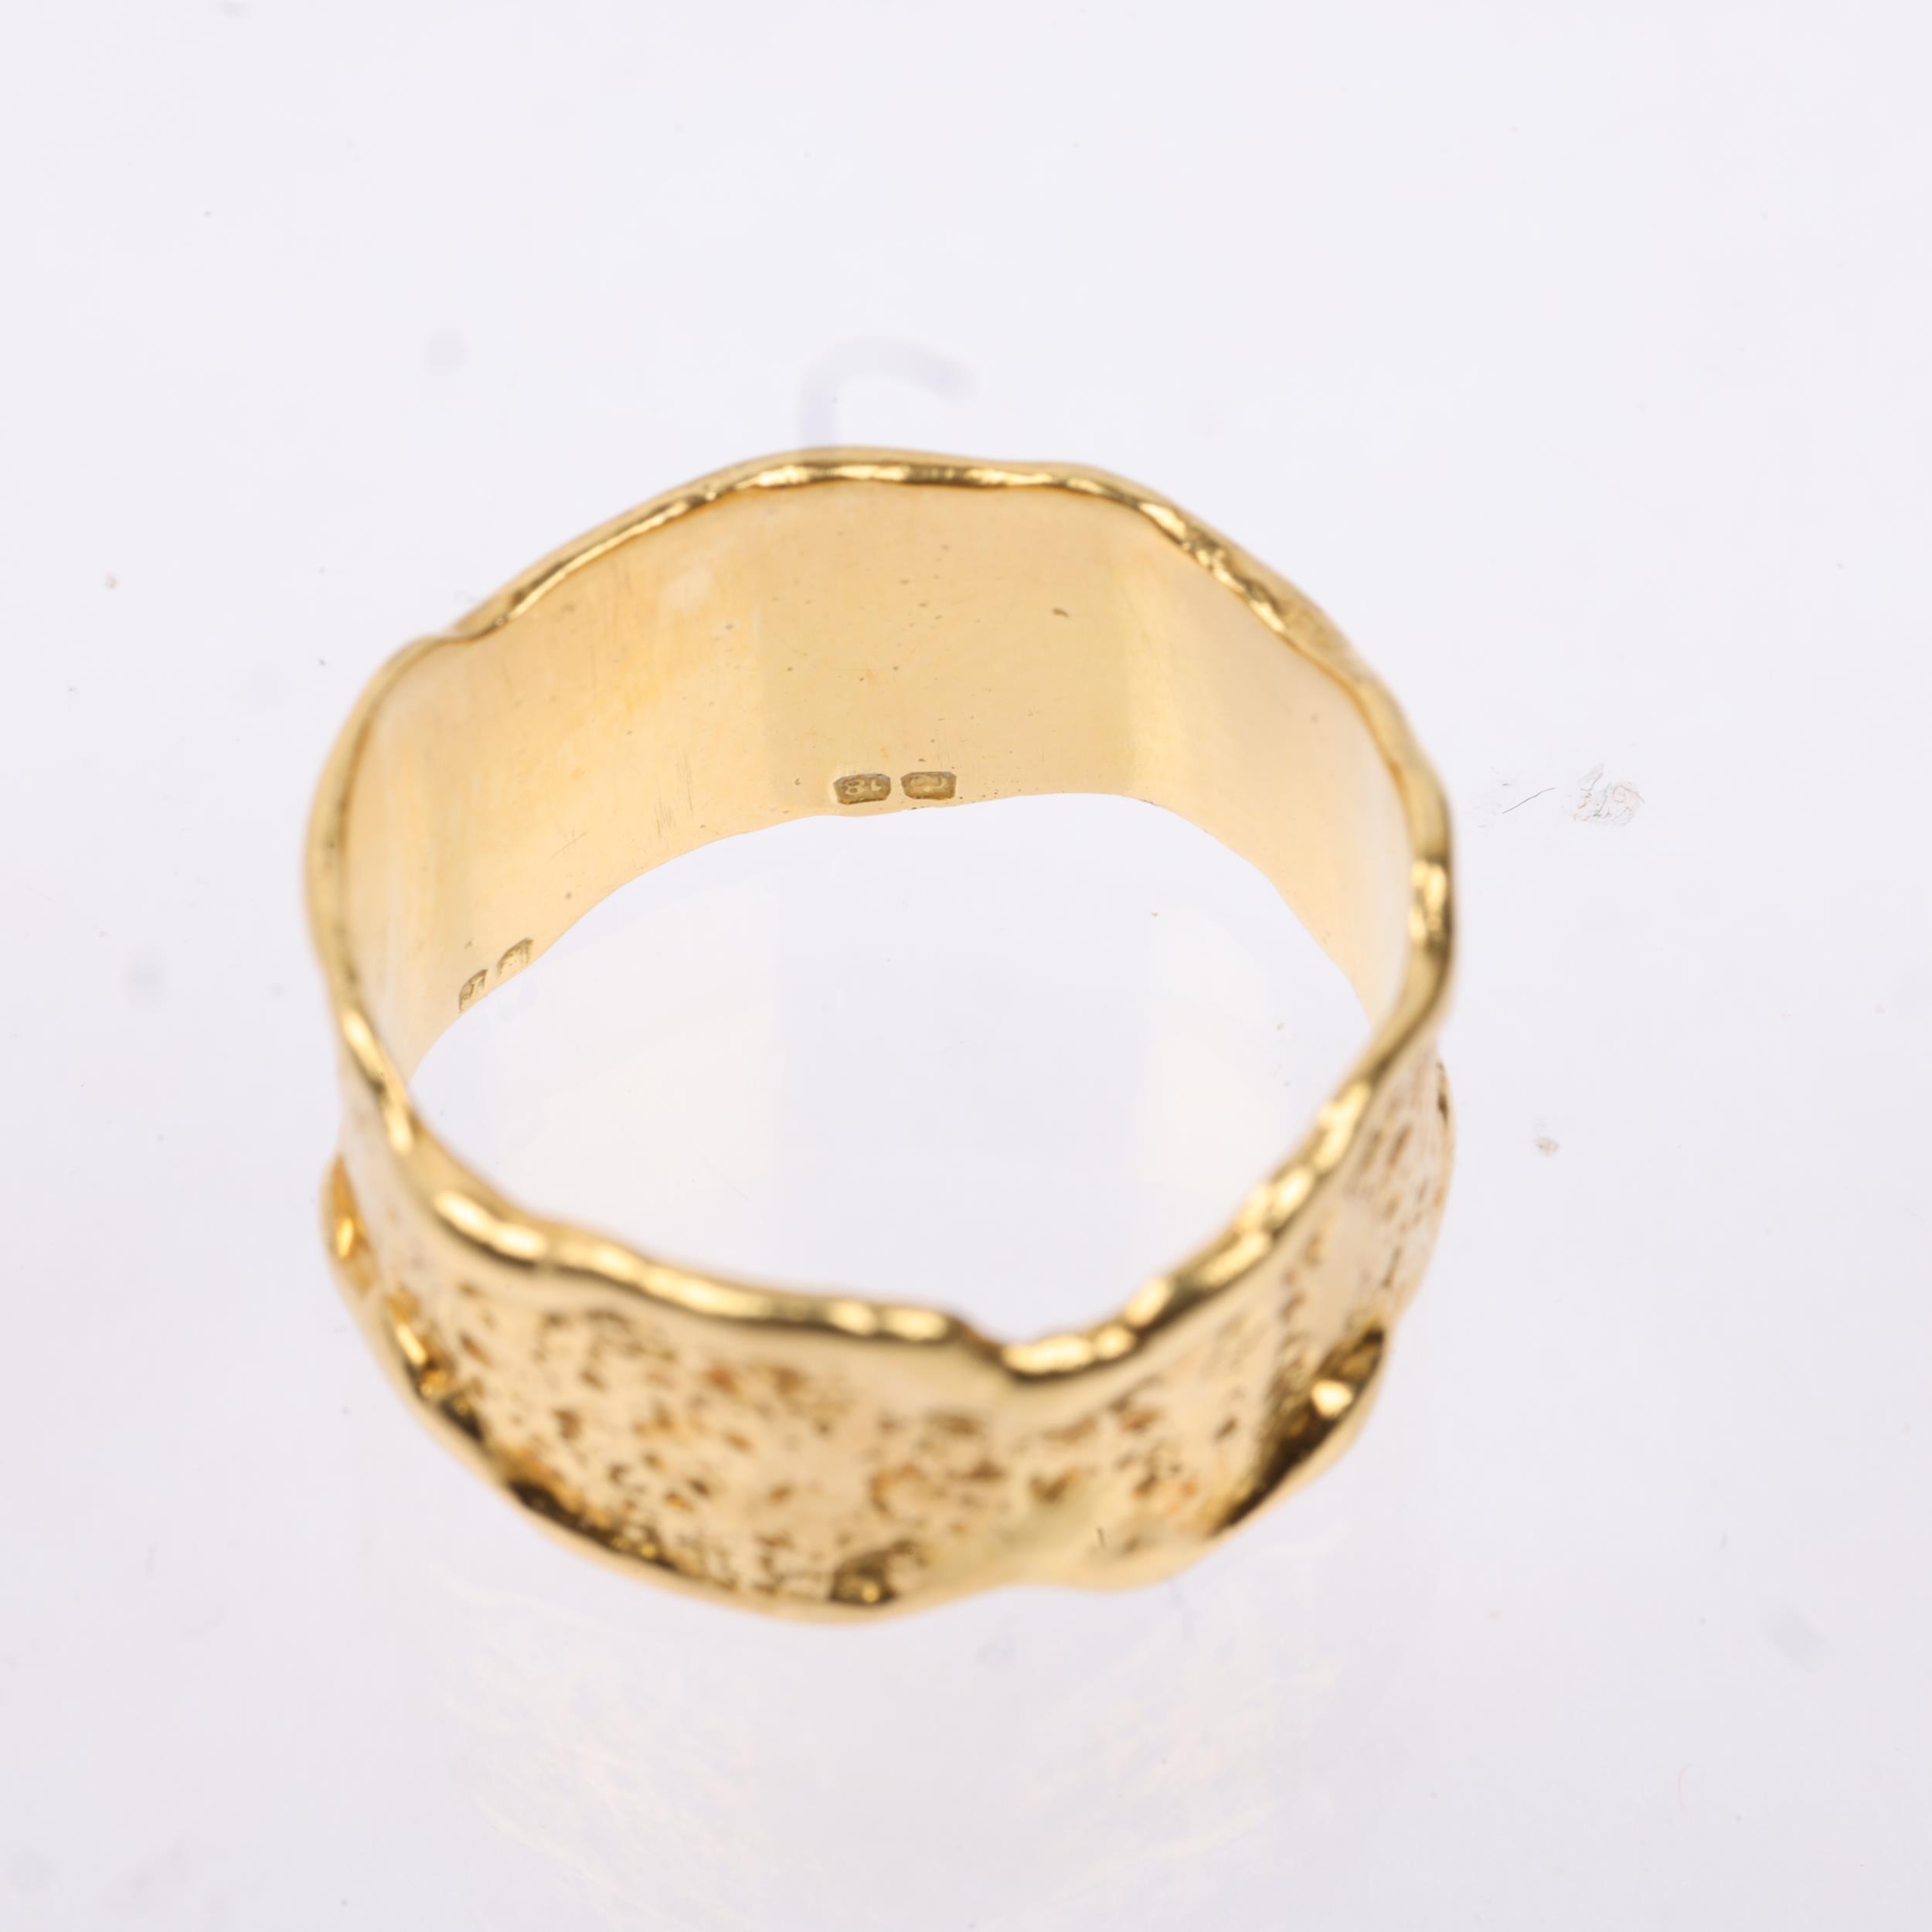 CHARLES DE TEMPLE - a late 20th century 18ct gold abstract band ring, marked C De T, London 1972, - Image 3 of 4